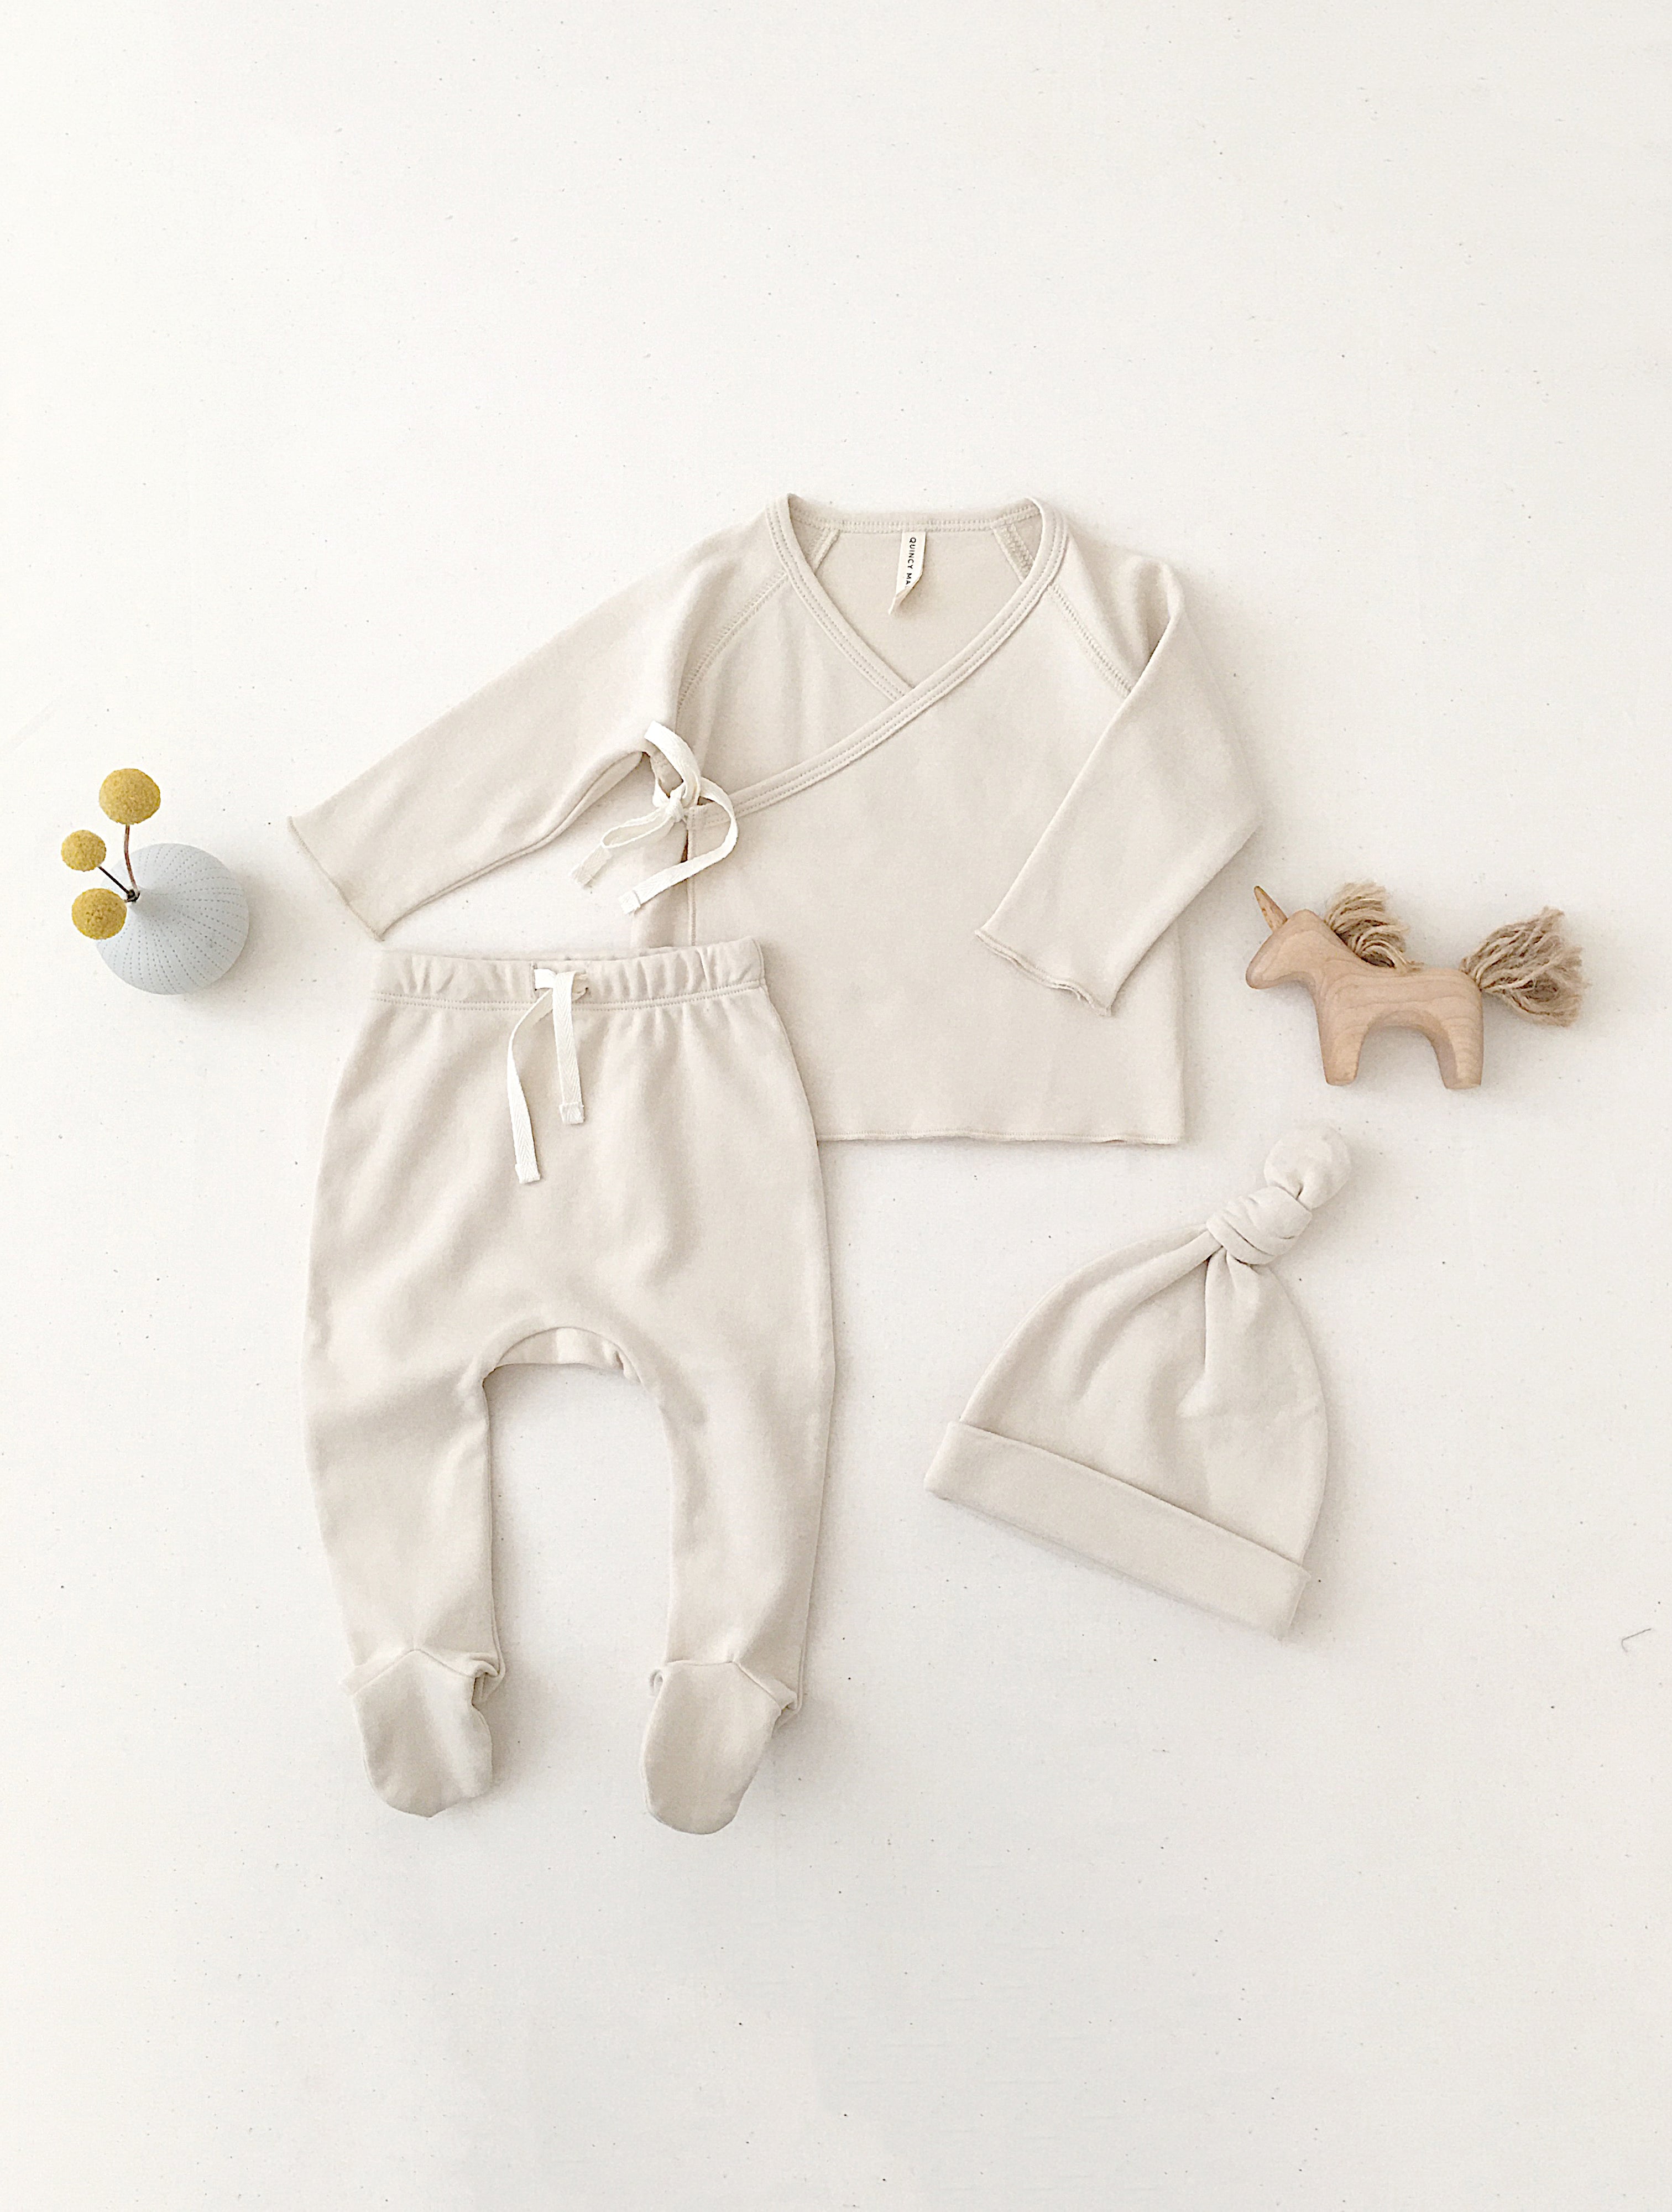 Wrap Top + Footed Pant Set || Ivory - Rylee + Cru | Kids Clothes | Trendy Baby Clothes | Modern Infant Outfits |